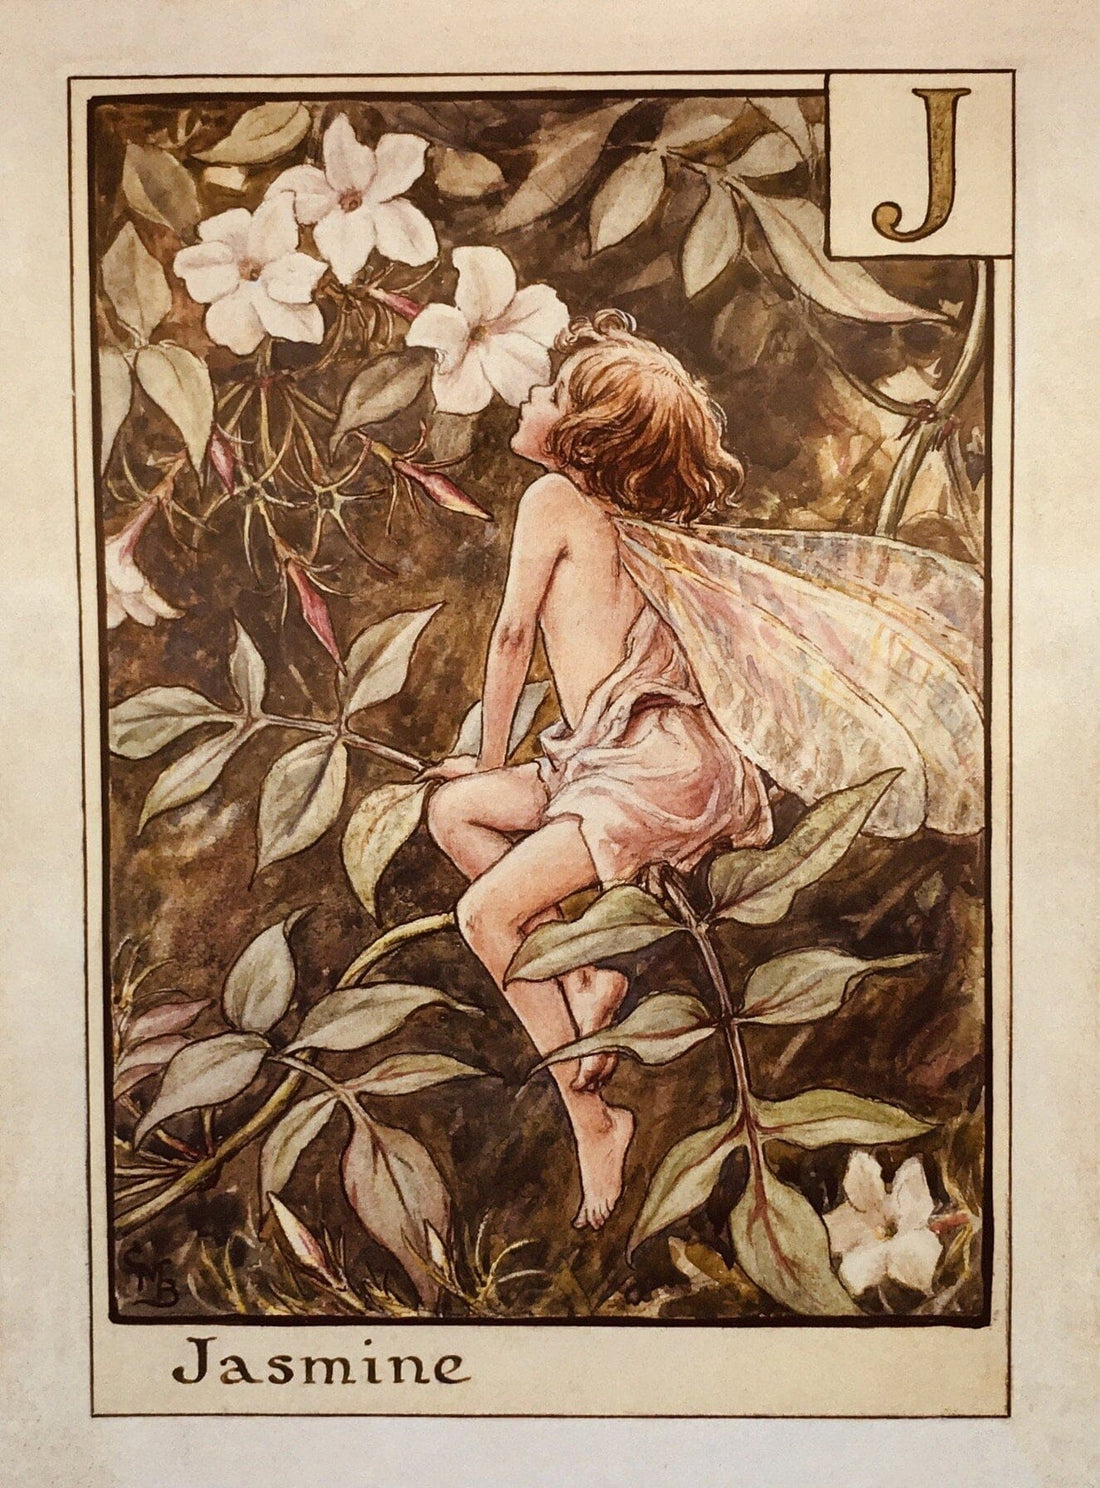 Where did the “Flower Fairies” come from?